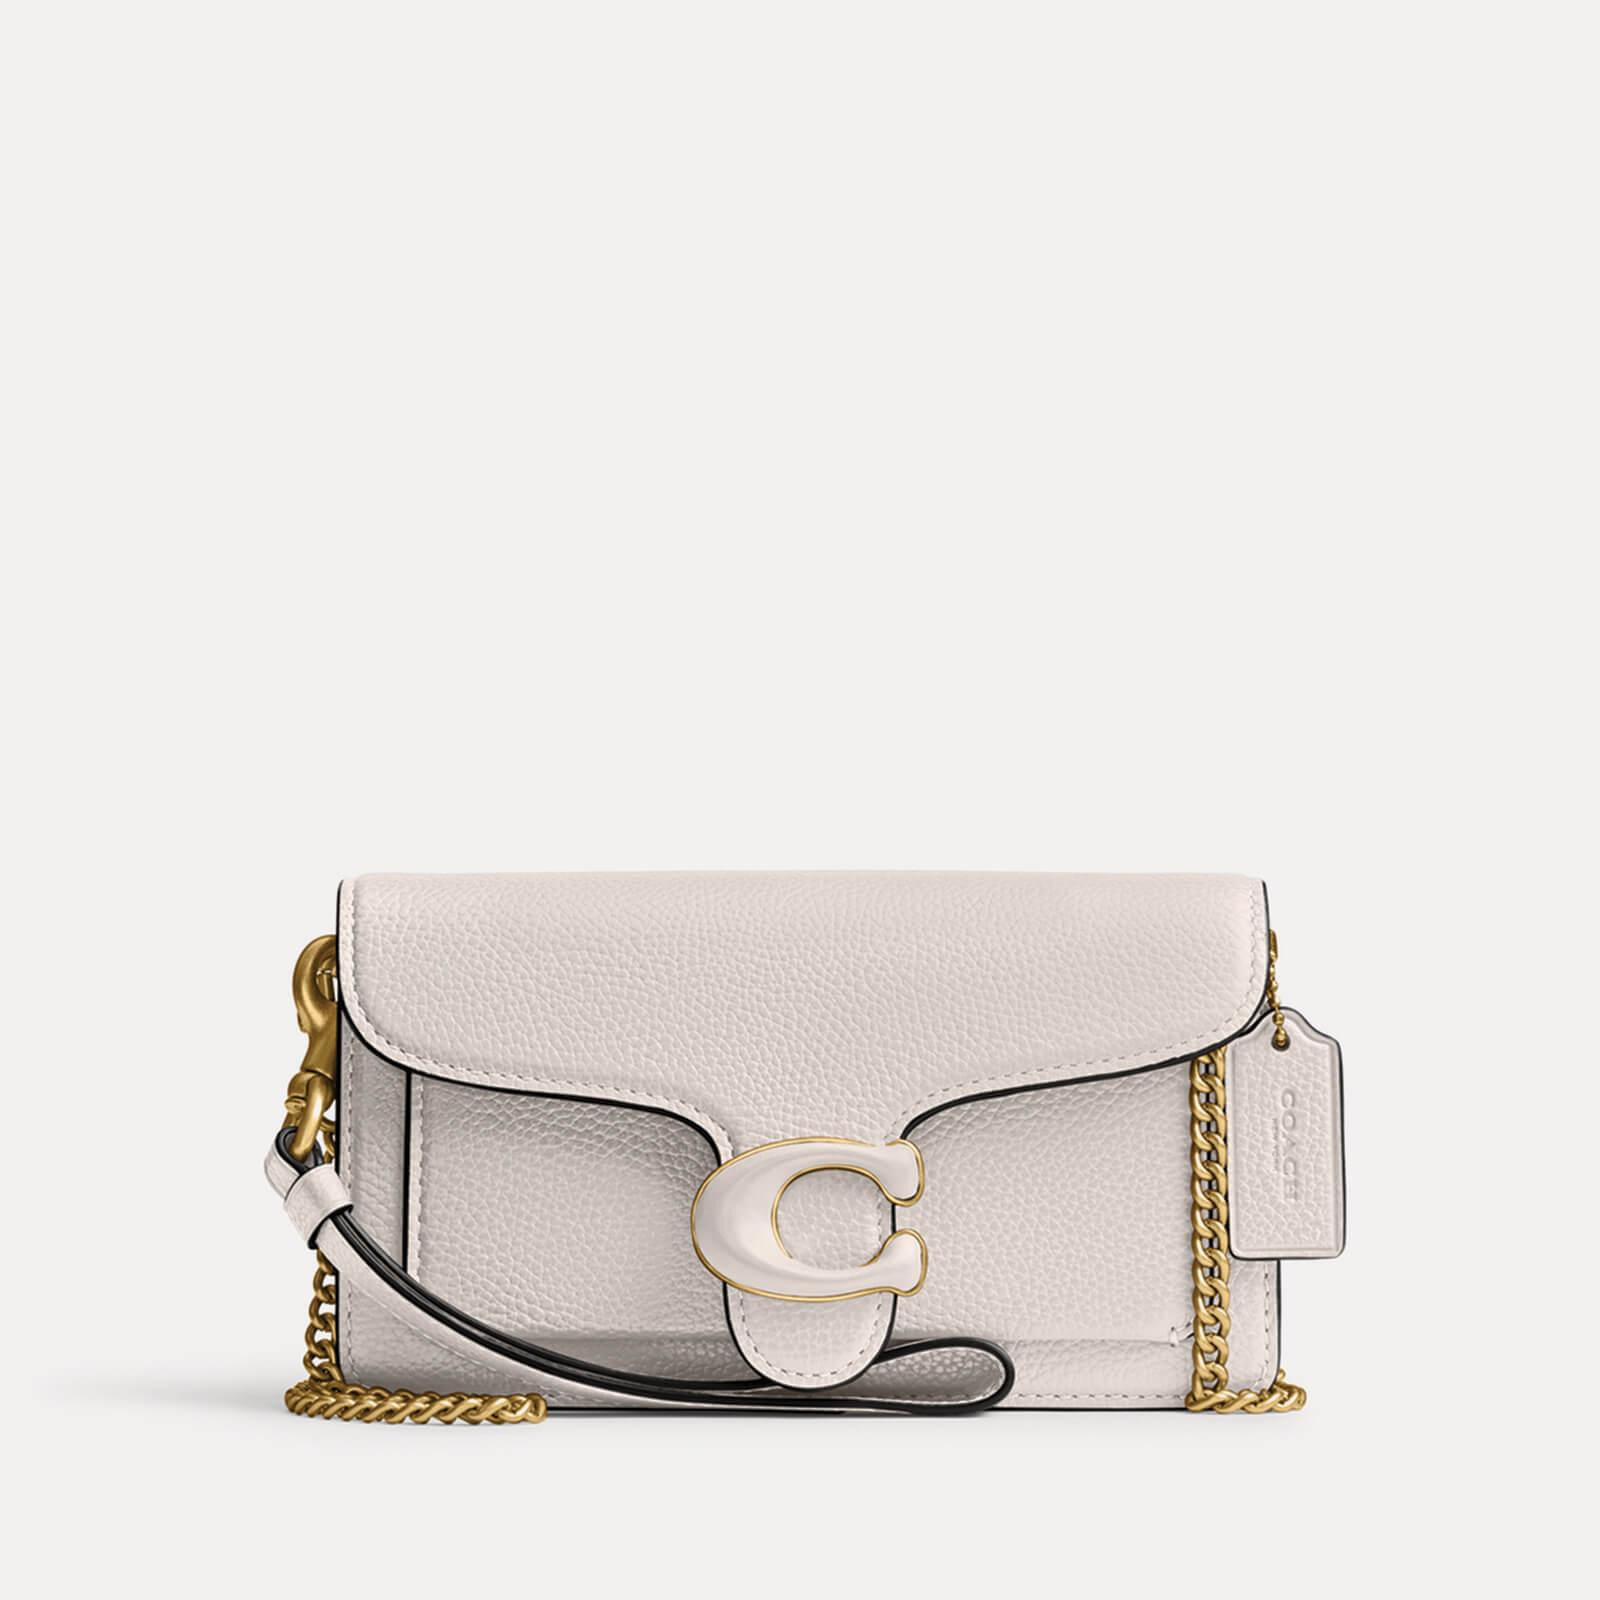 COACH Polished Pebble Tabby Leather Wristlet Bag in Natural | Lyst Canada